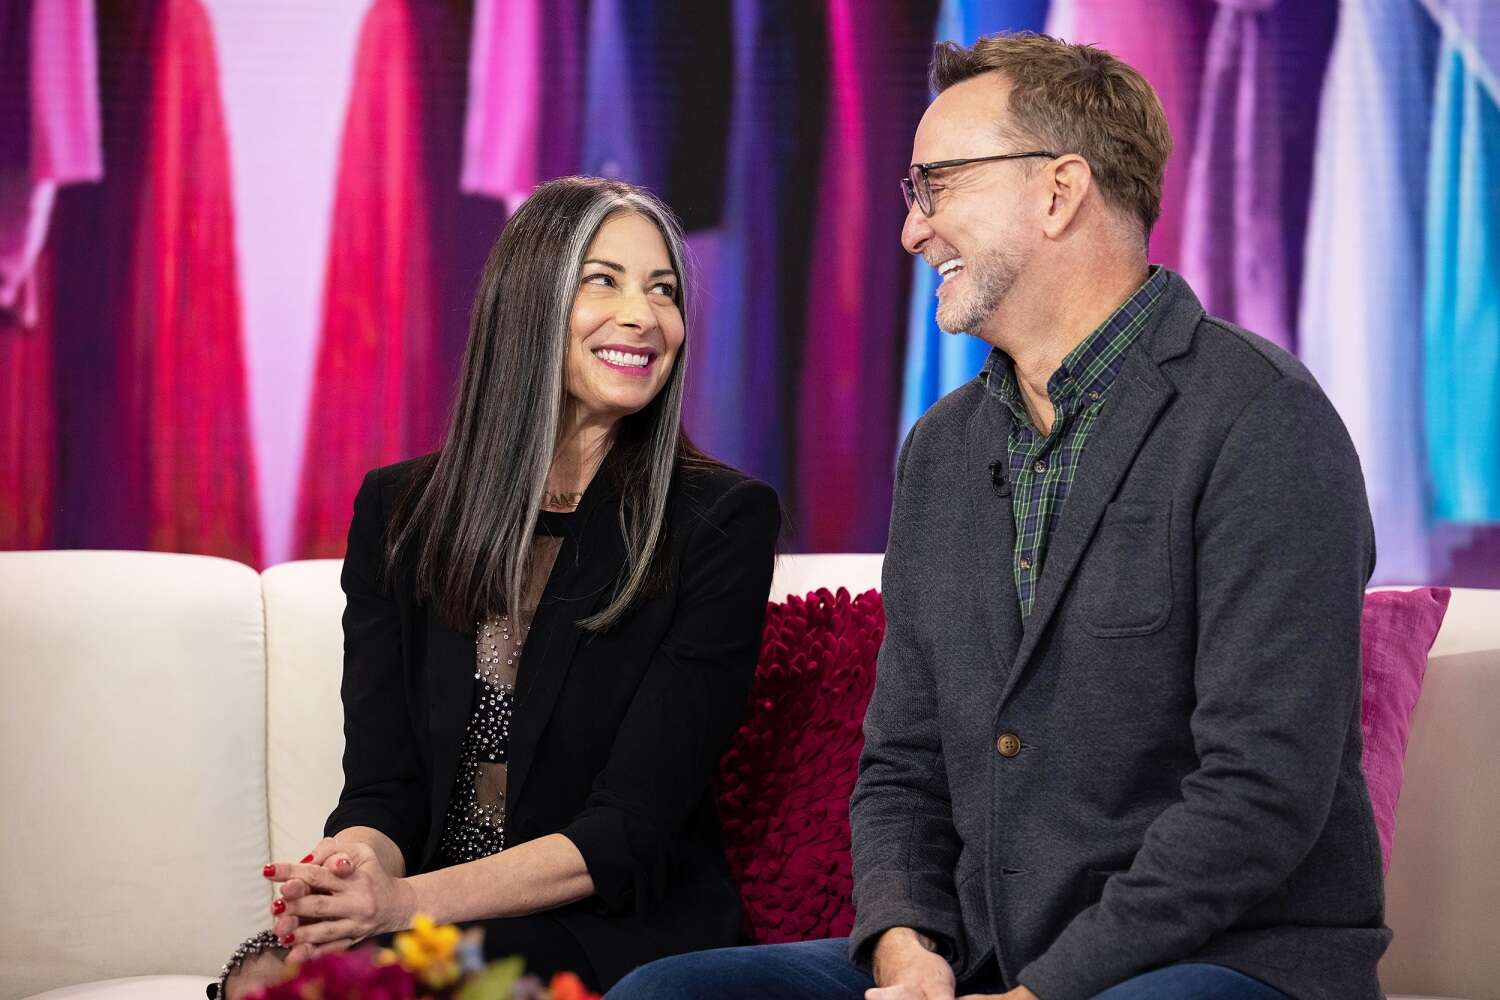 What happened between Stacy London and Clinton Kelly? - ABTC